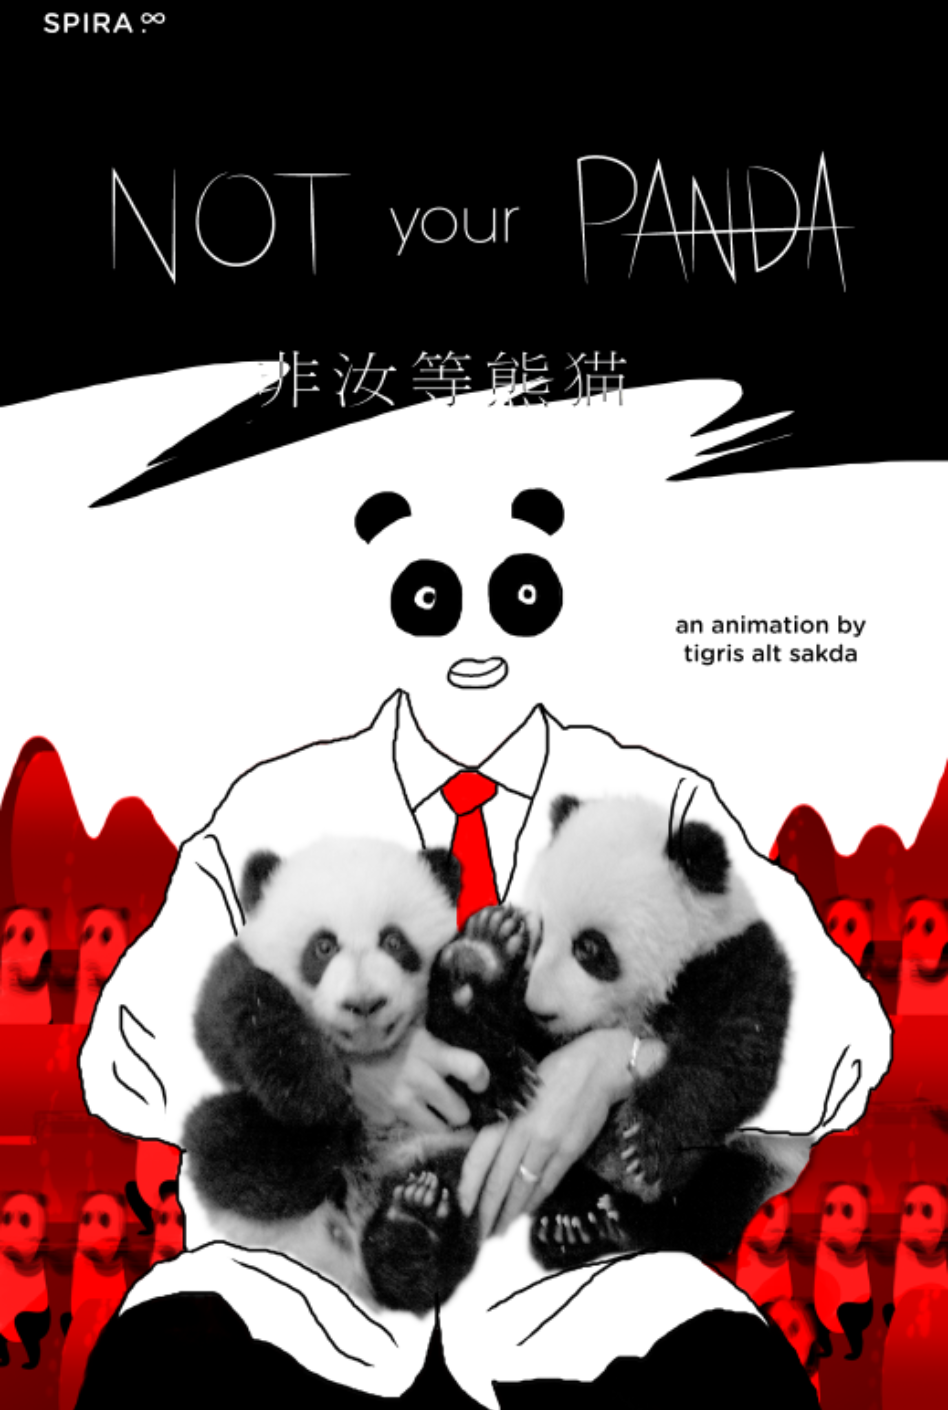 images/bottin_films/b6f0c98eae28c254f4f93b247eee2626-Not-your-panda-affiche.png#joomlaImage://local-images/bottin_films/b6f0c98eae28c254f4f93b247eee2626-Not-your-panda-affiche.png?width=948&height=1410